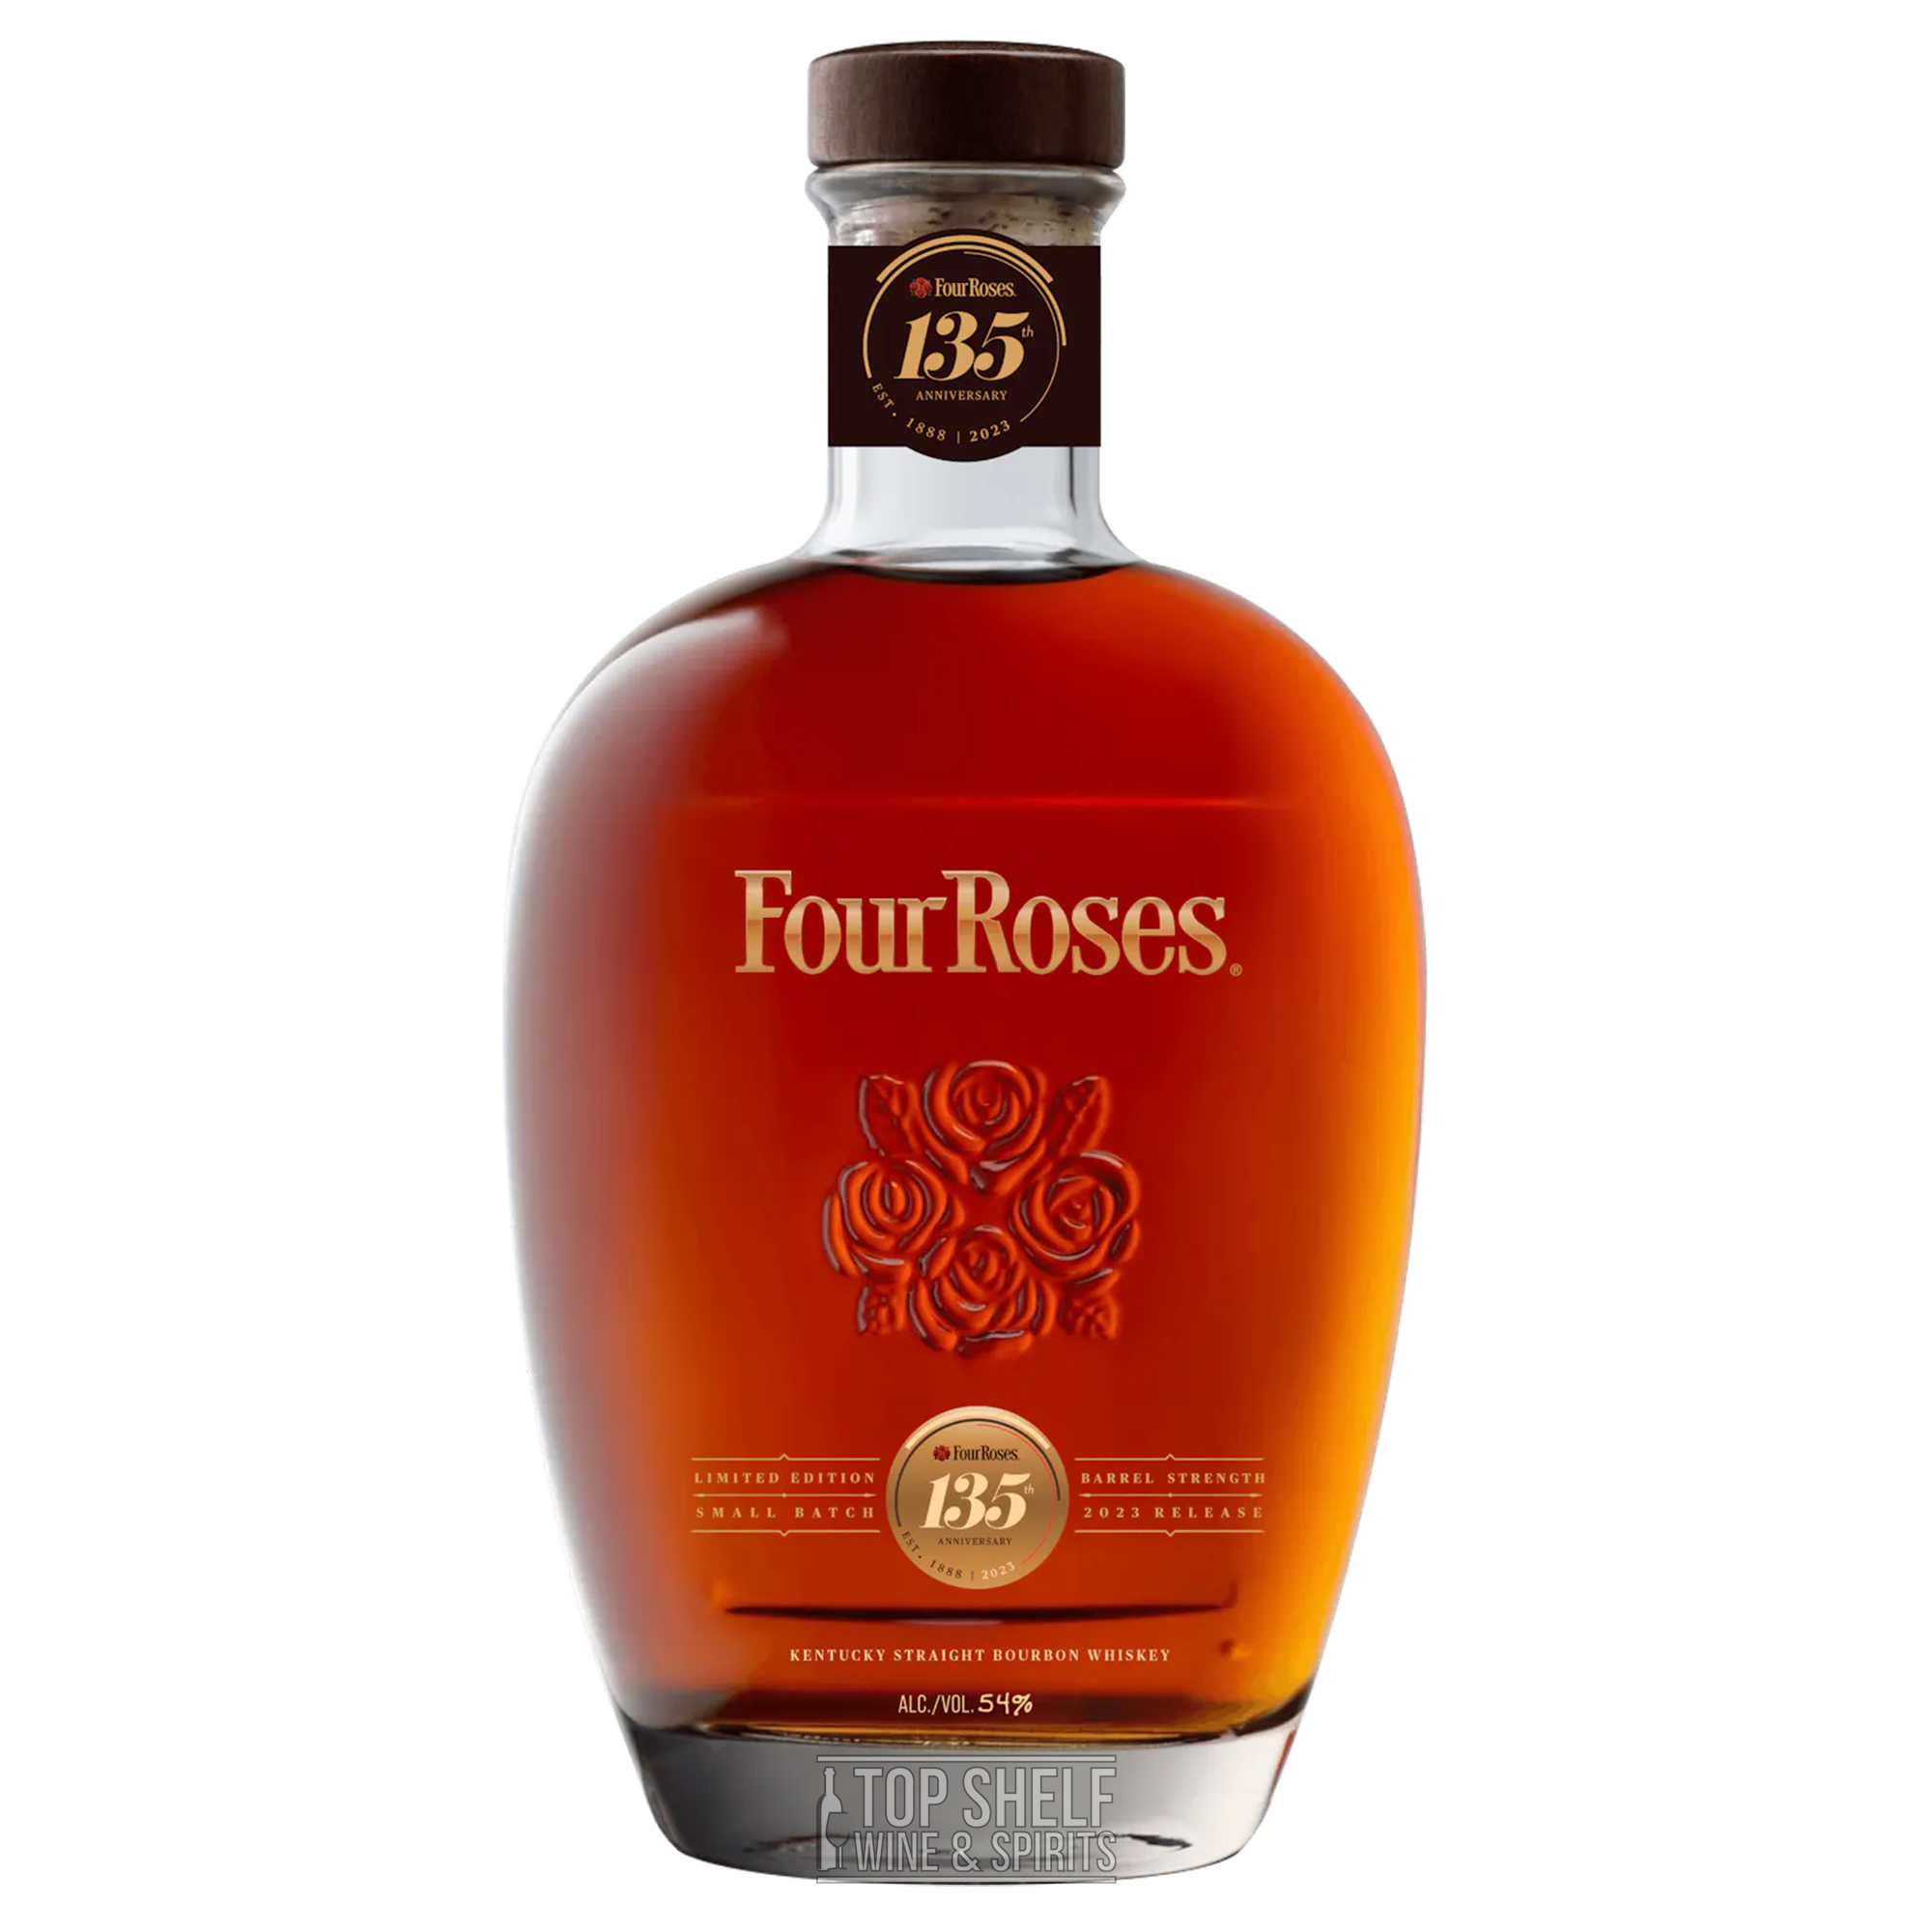 Four Roses 135th Anniversary Limited Edition Small Batch Bourbon